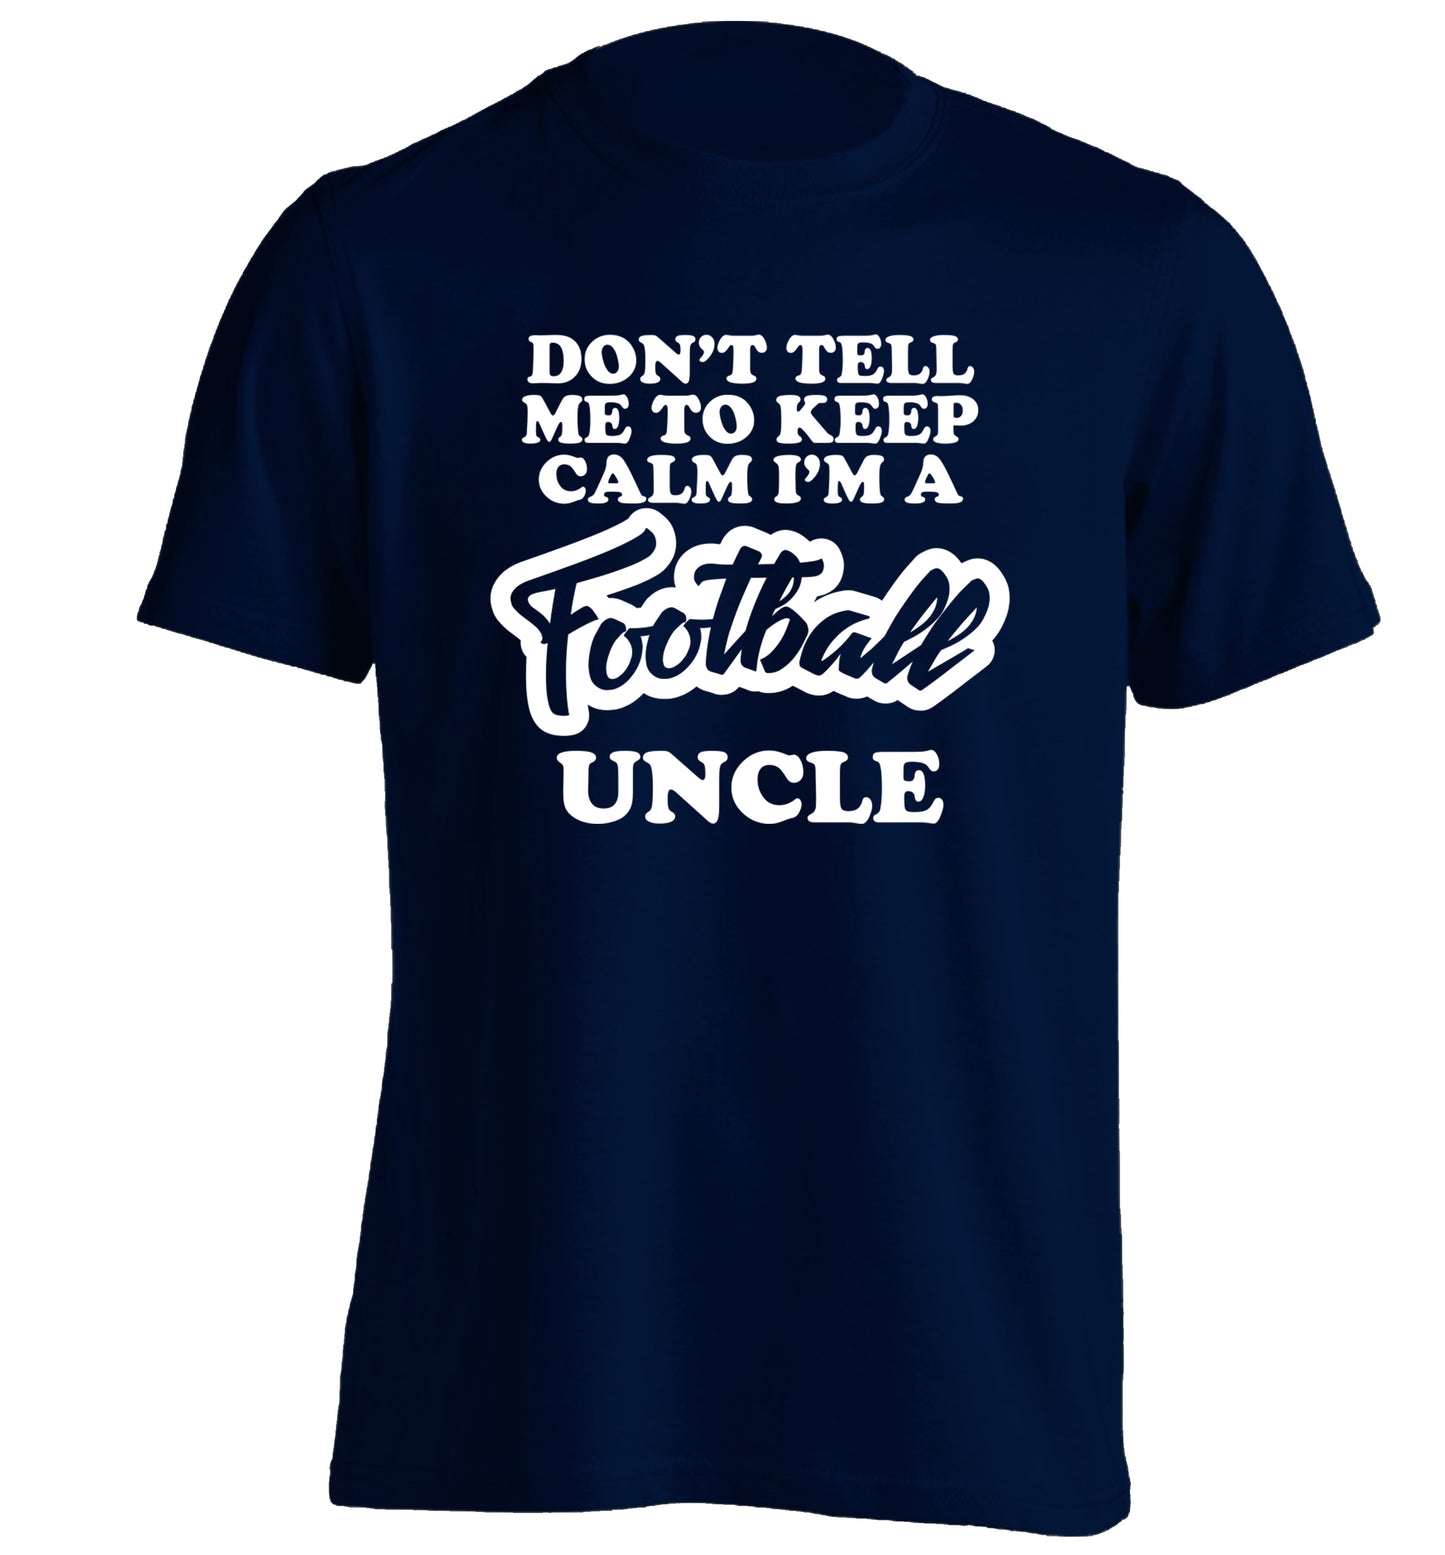 Don't tell me to keep calm I'm a football uncle adults unisexnavy Tshirt 2XL